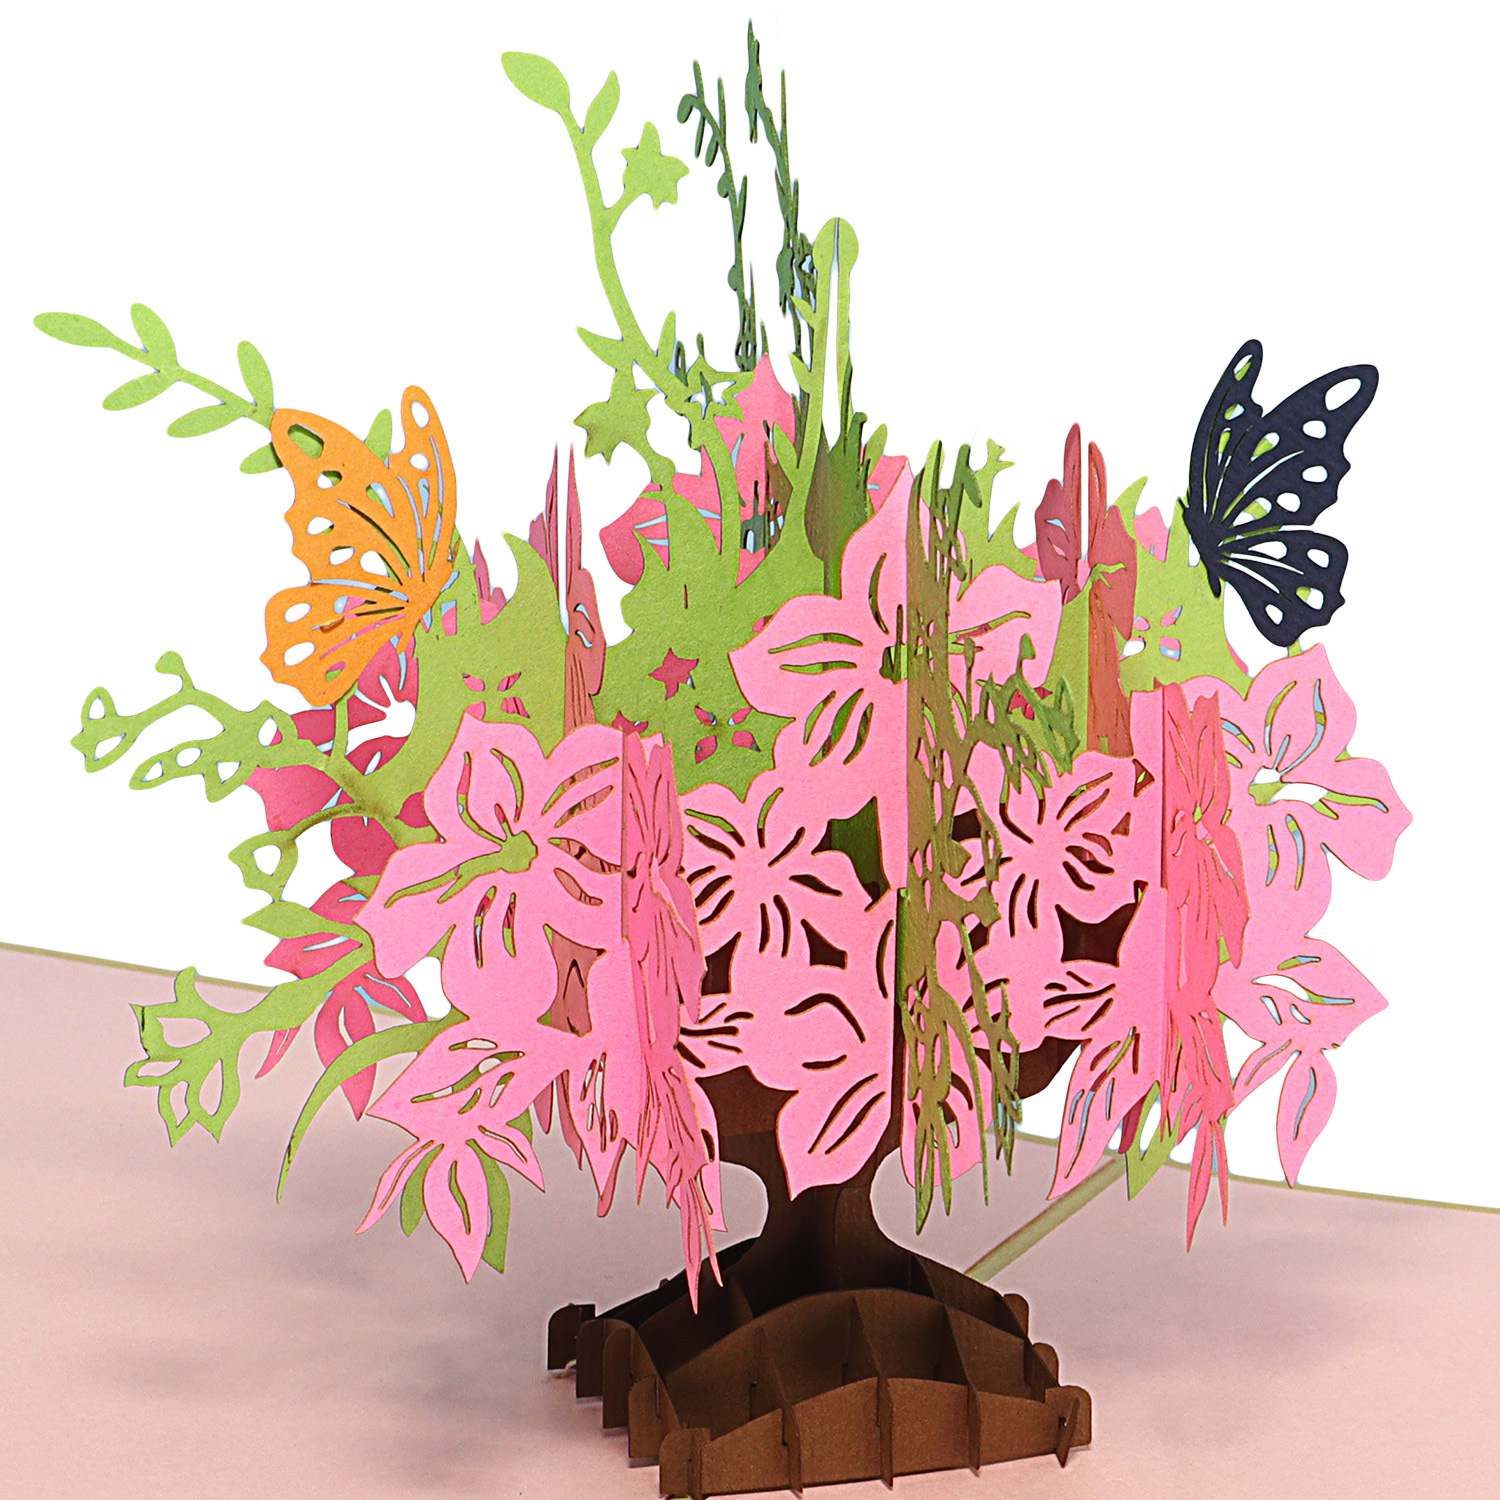 LINPOPUP 3D Pop Up Greeting Card, Best Wishes, Birthday, Mother's Day, Thank You, Good Luck, Flowers, Pink Flowers in a Vase, LIN17652, LINPopUp®, N379